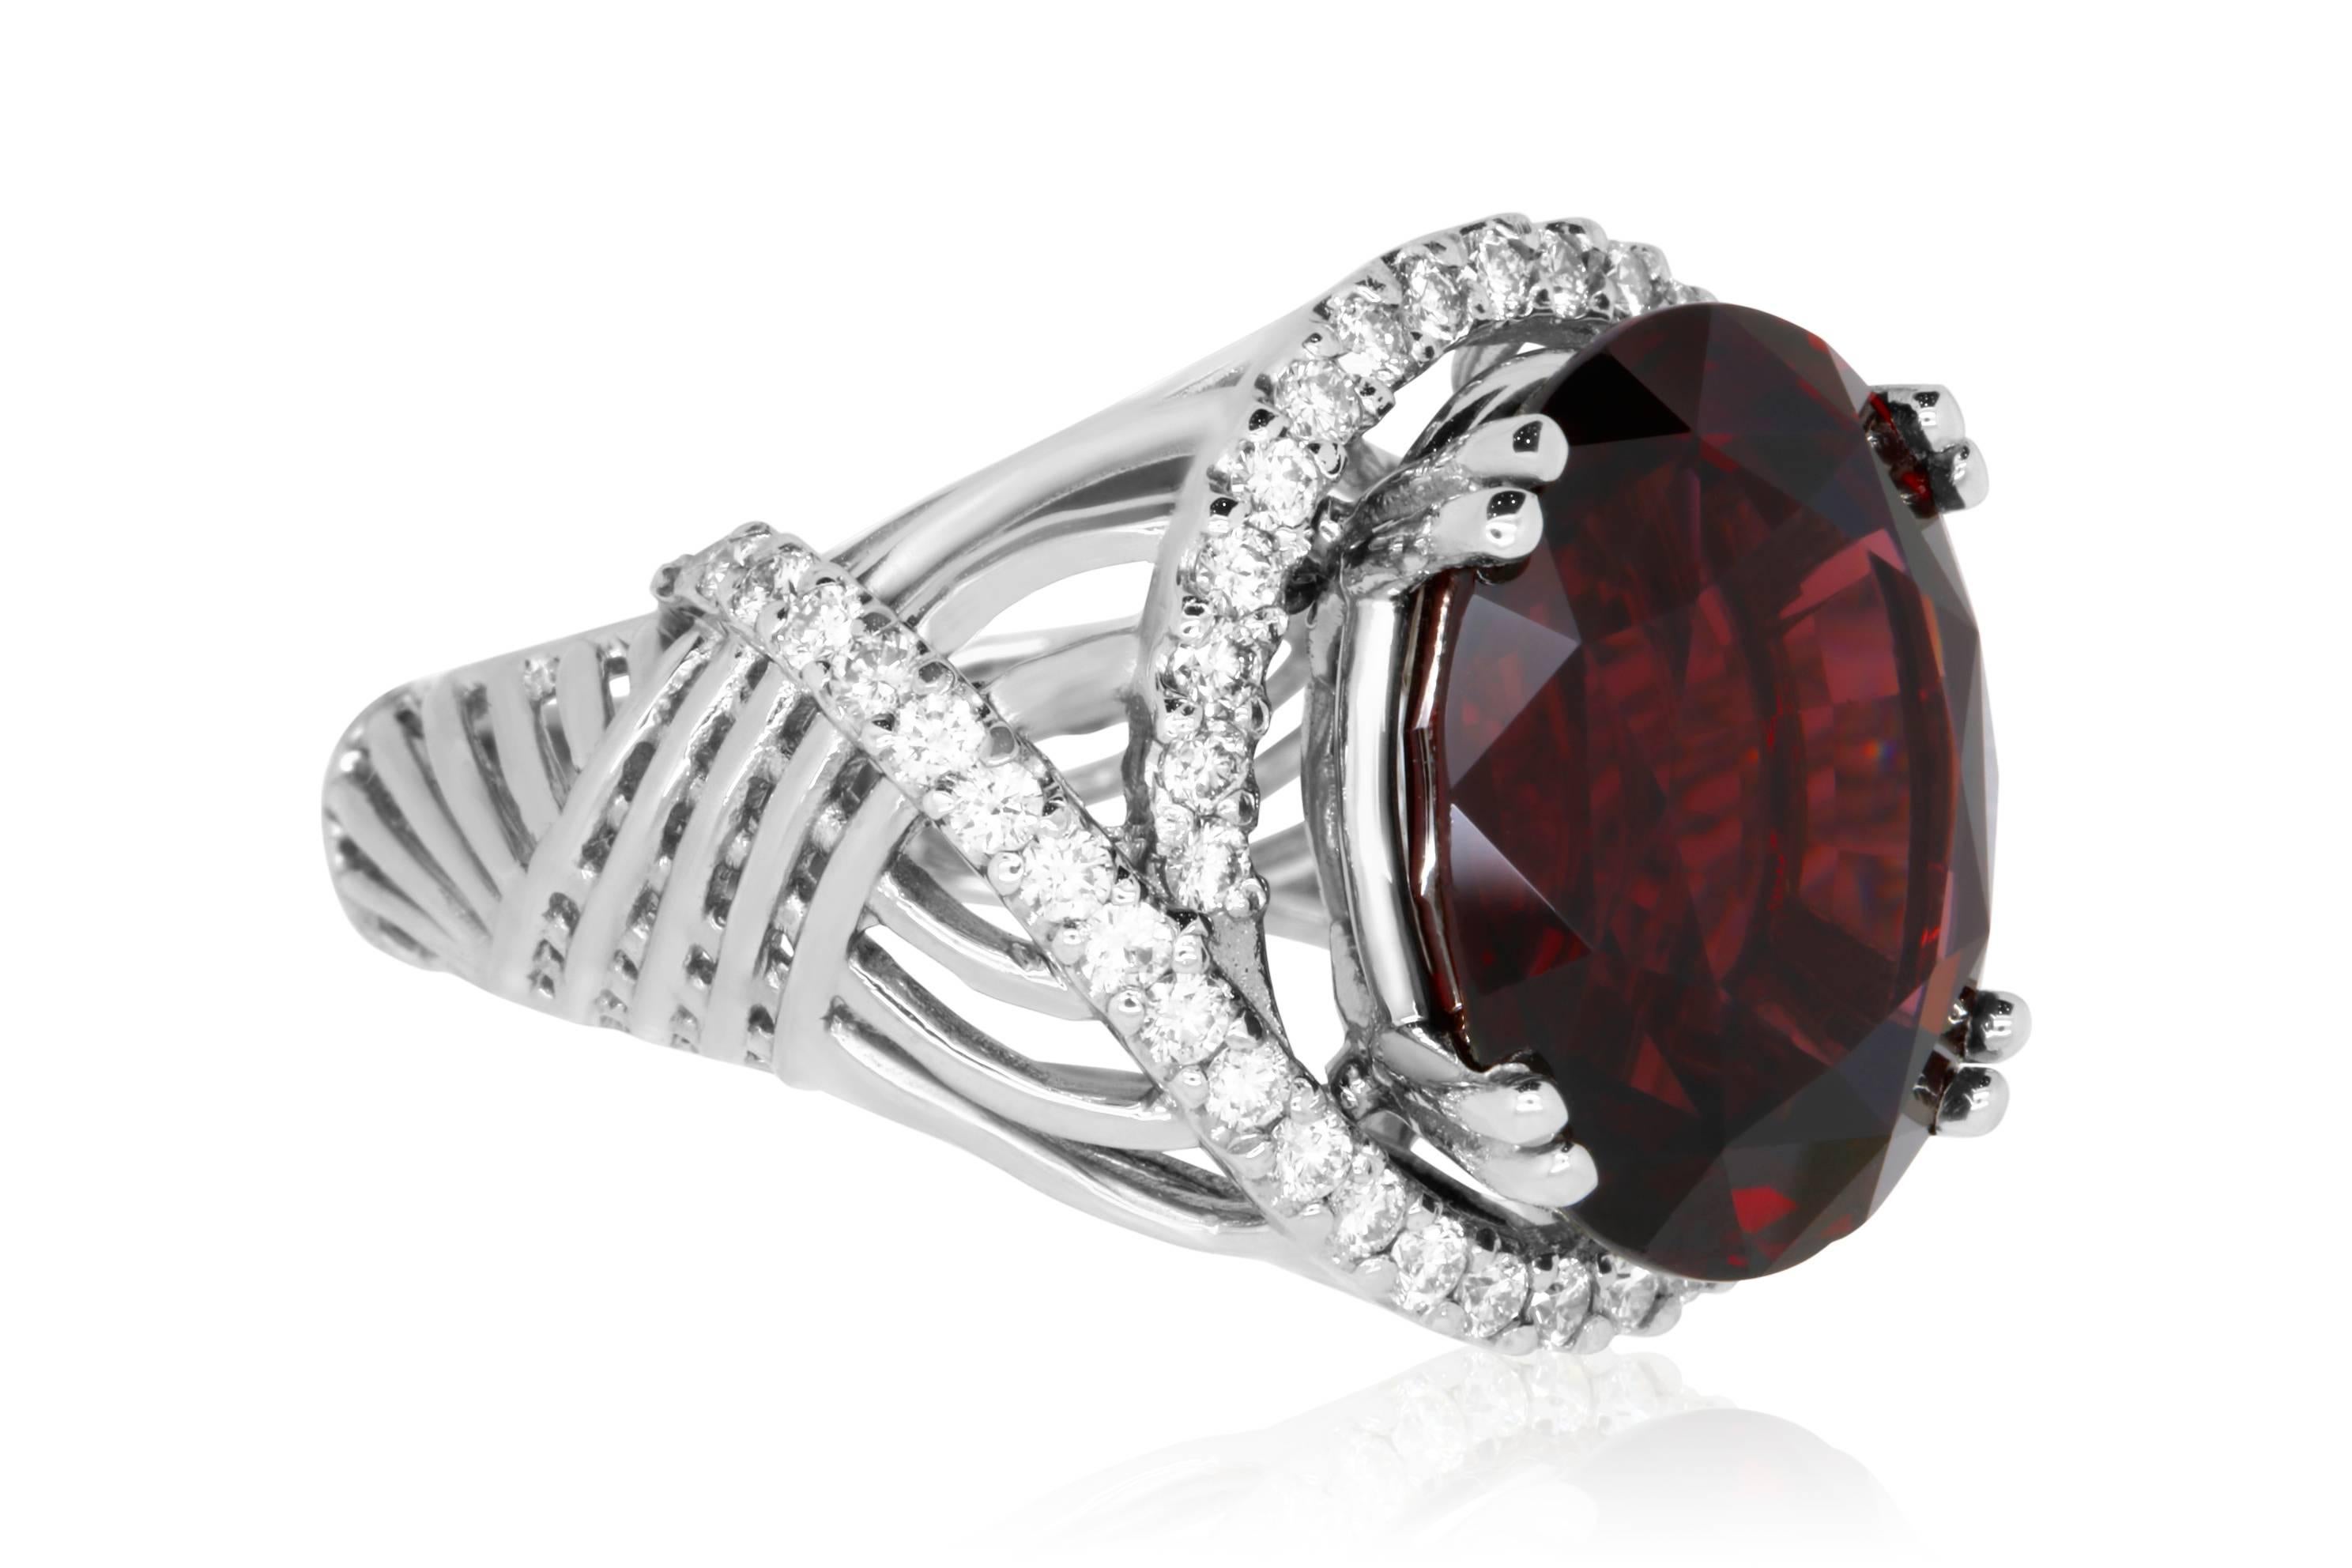 Material: 14k White Gold 
Center Diamond Details: 17.16 Carat Oval Rhodolite Garnet - Measuring 16.9 x 14.2 mm
Mounting Diamond Details: 50 Round White Diamonds Approximately 0.9 Carats - Clarity: VS-SI / Color: H-I
Ring Size: Size 6.75 (can be